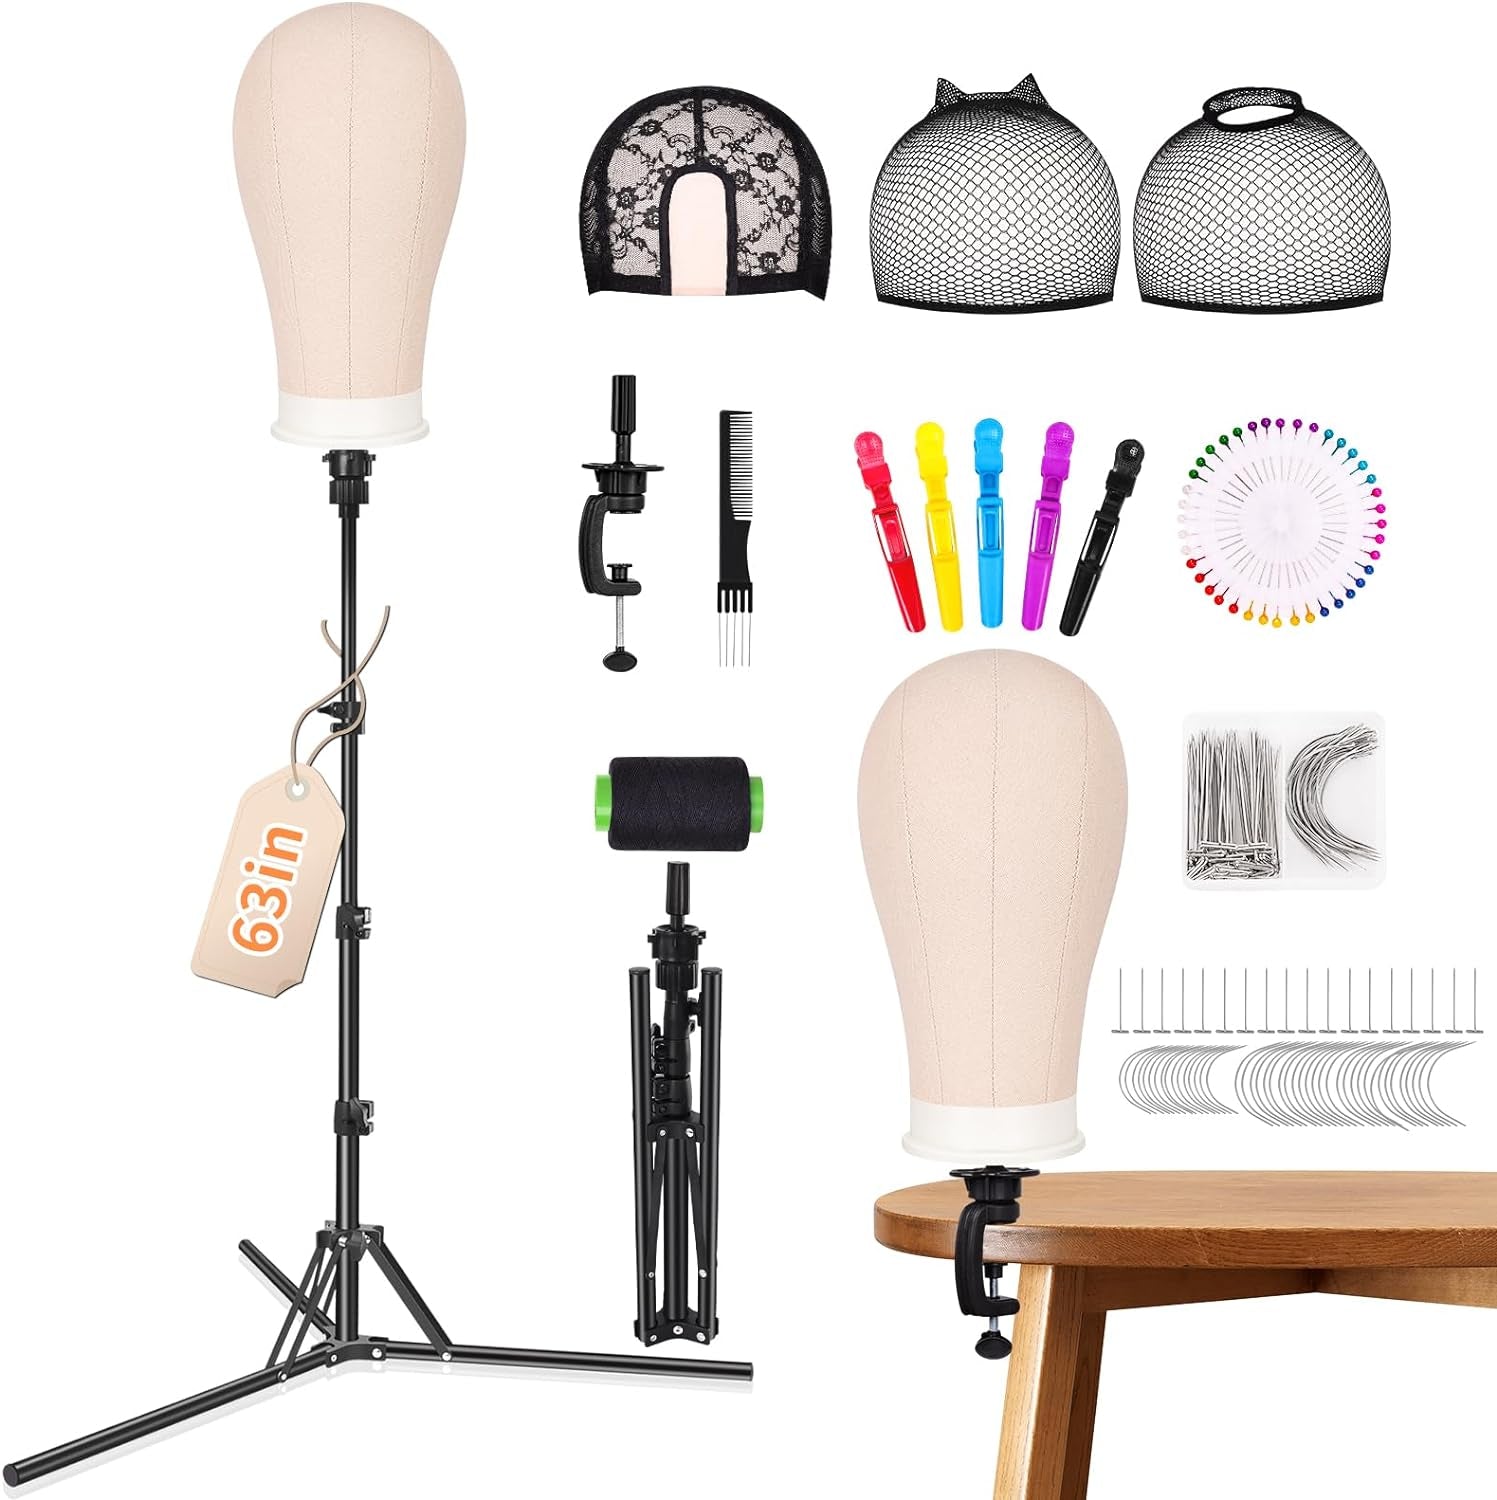 Wig Head Stand Set, [ 63Inch Tall ] Wig Stand Tripod with Mannequin Head Included, 22'' Canvas Block Mannequin Head for Wigs Making Display Styling with Wig Caps, Wig T Pins, Table Clamp